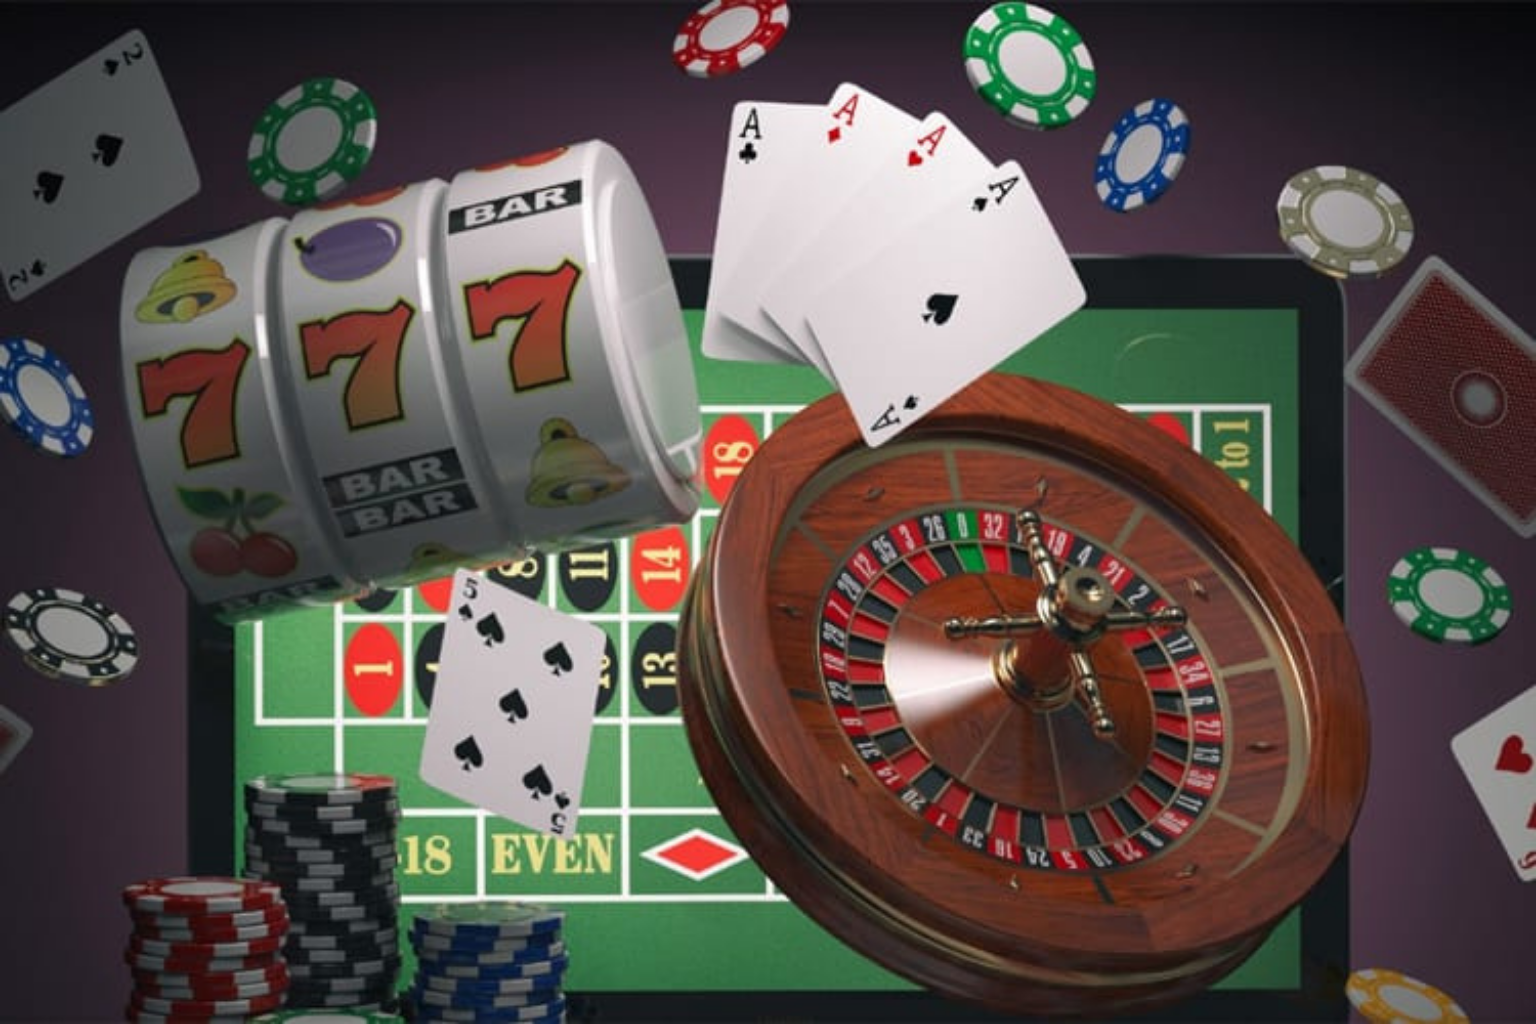 How to Make Money with Real Online Casino Games